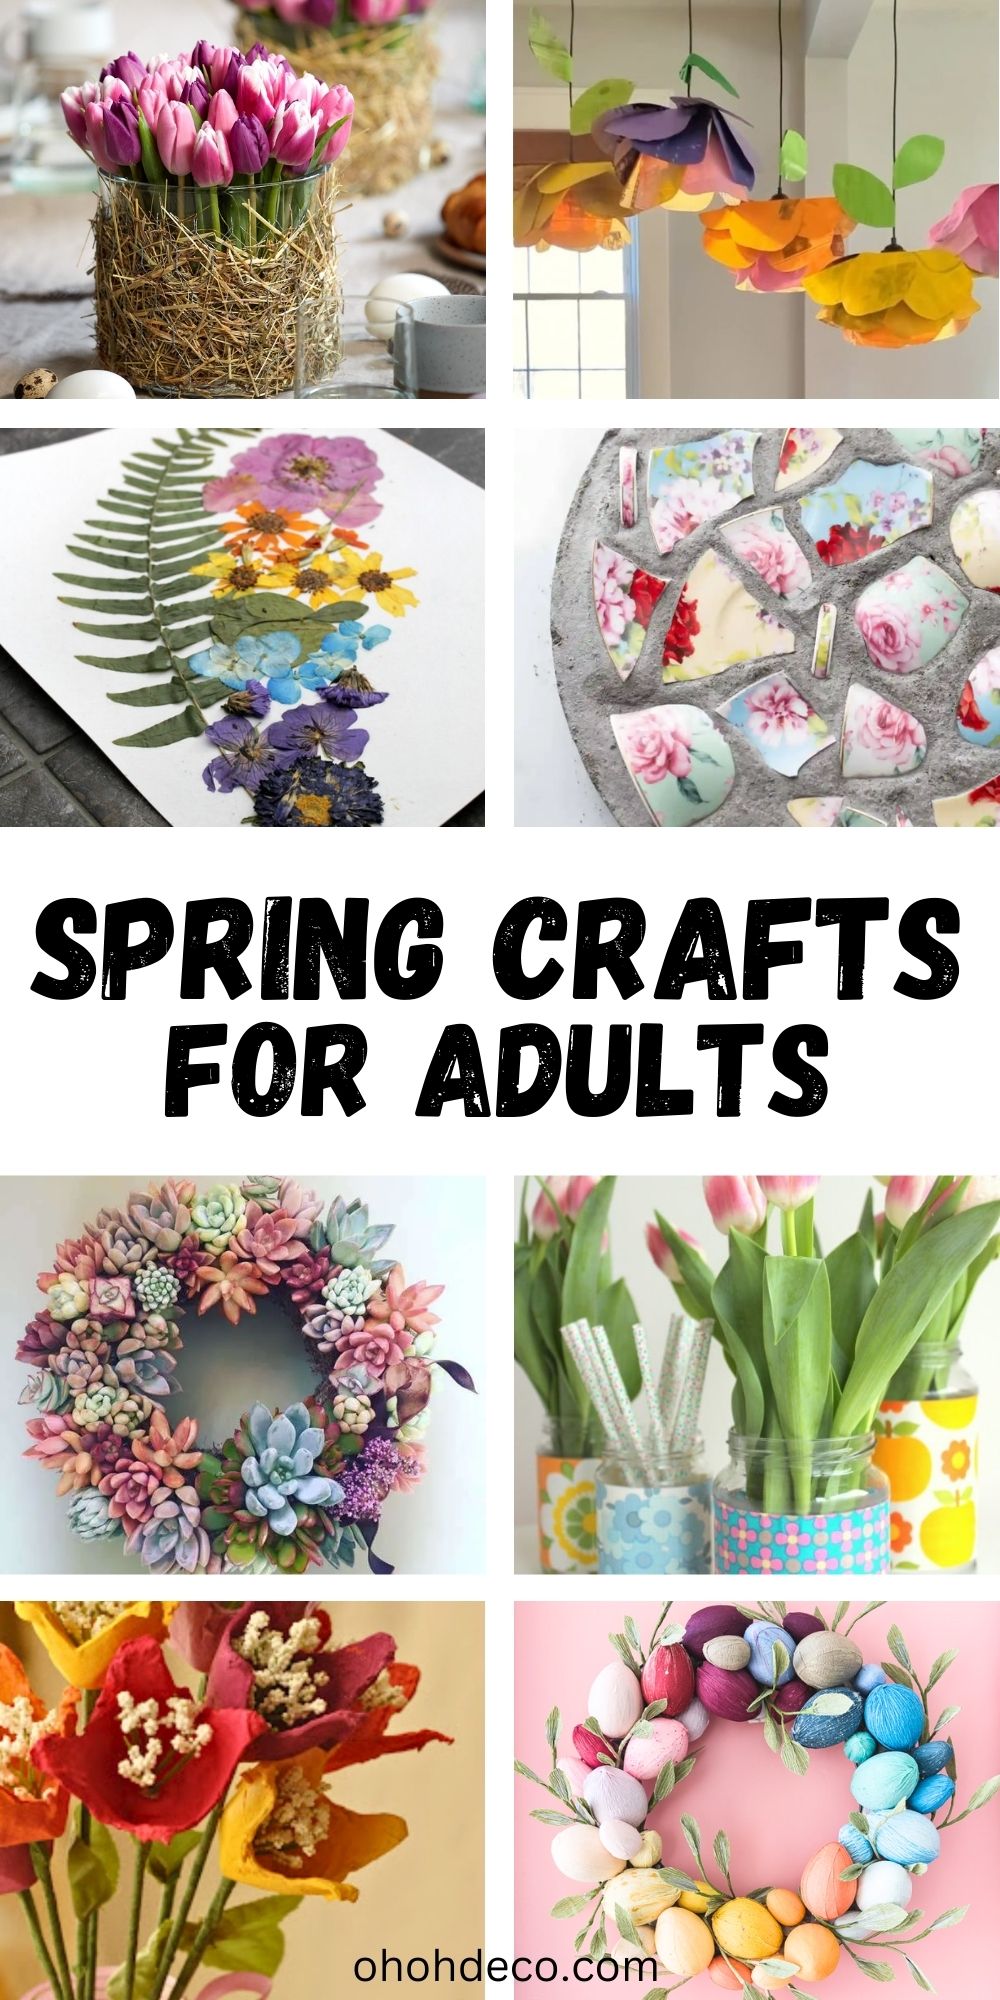 Spring crafts for adults and seniors